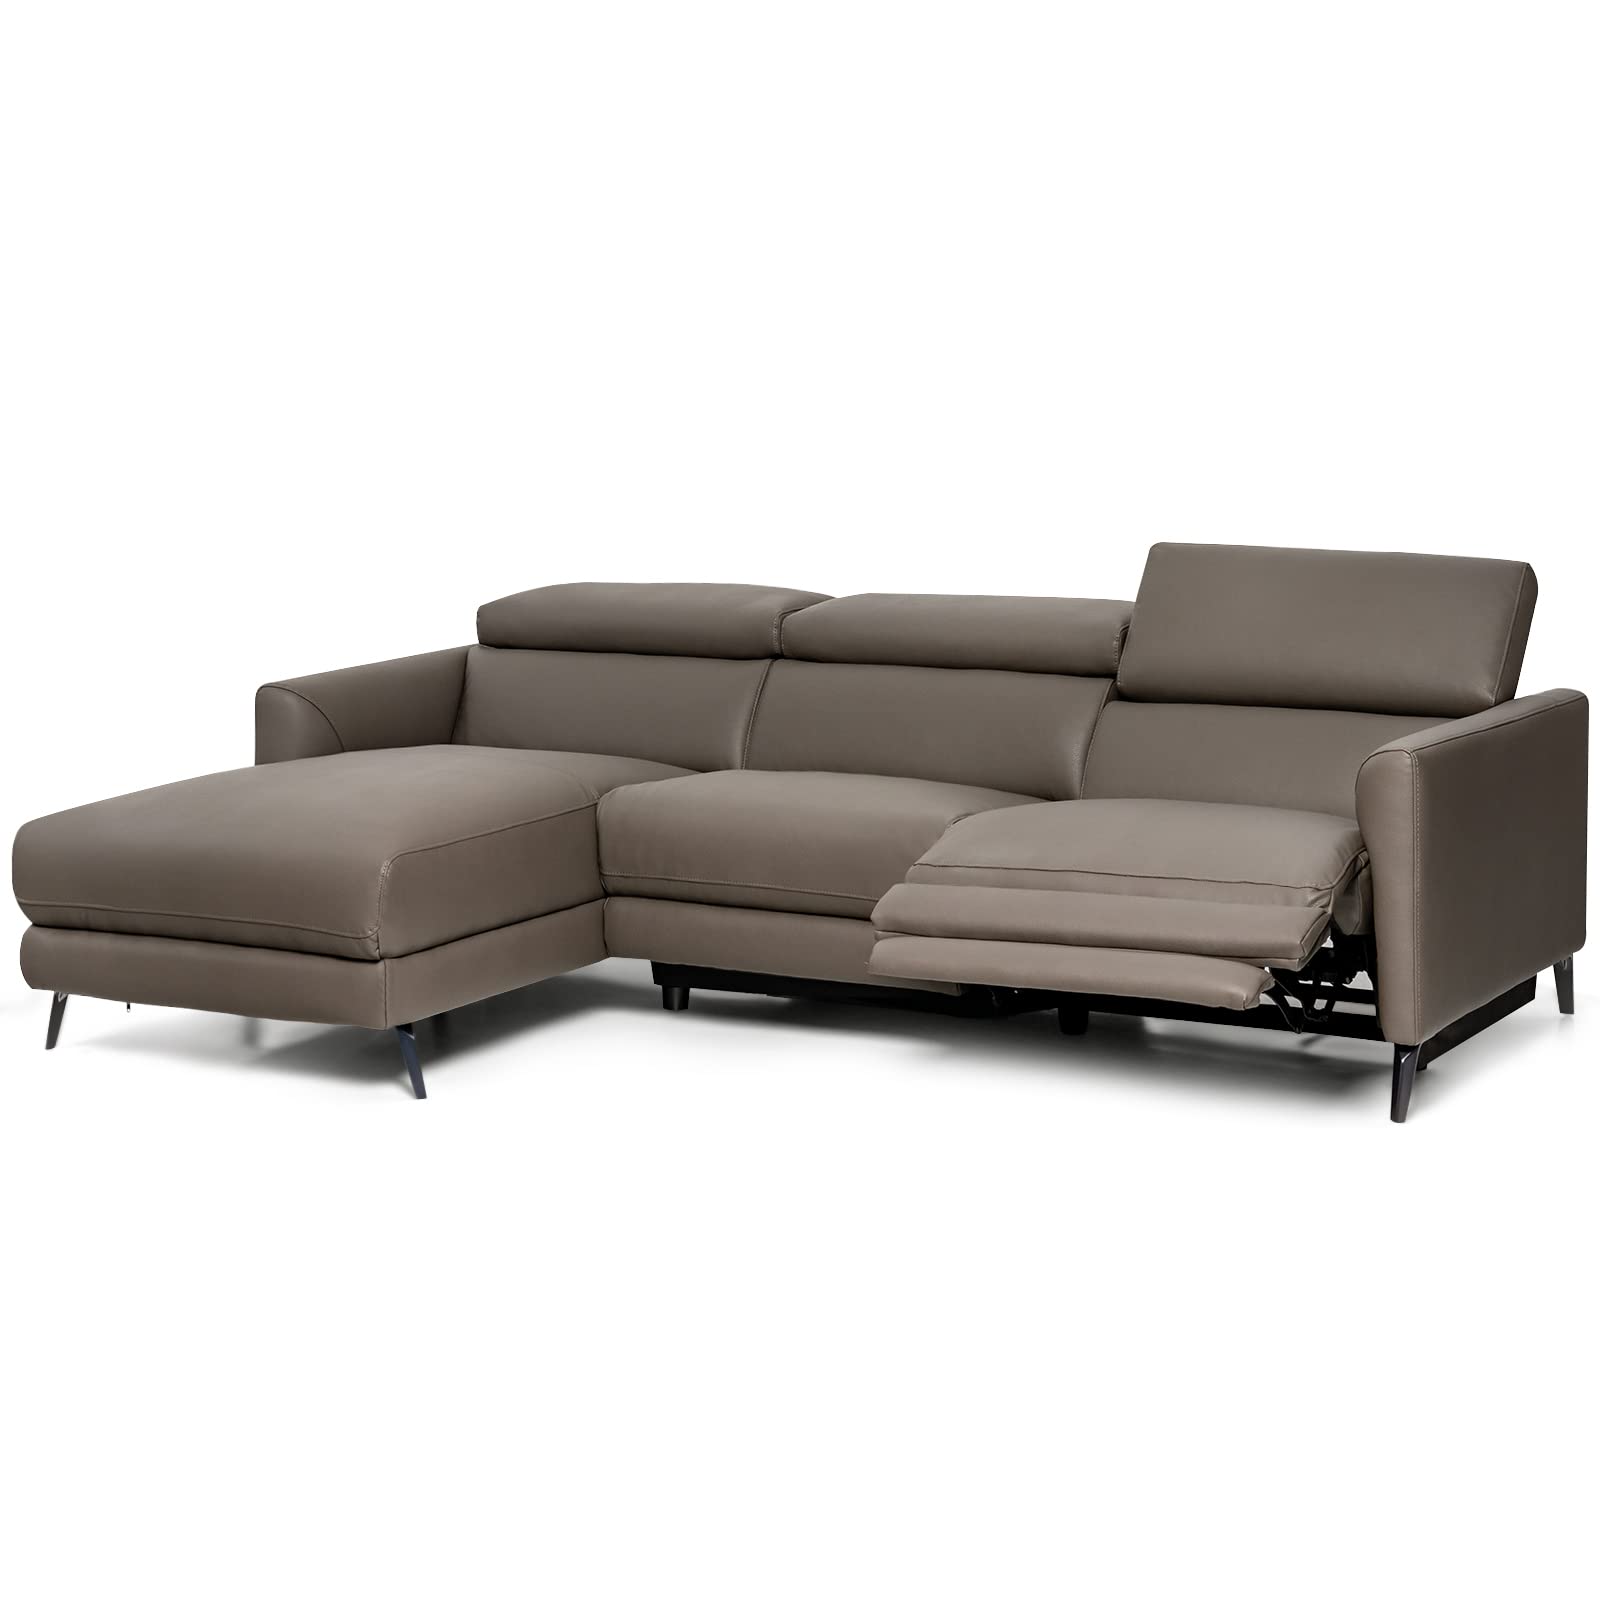 Giantex Upholstered Sectional Sofa Couch